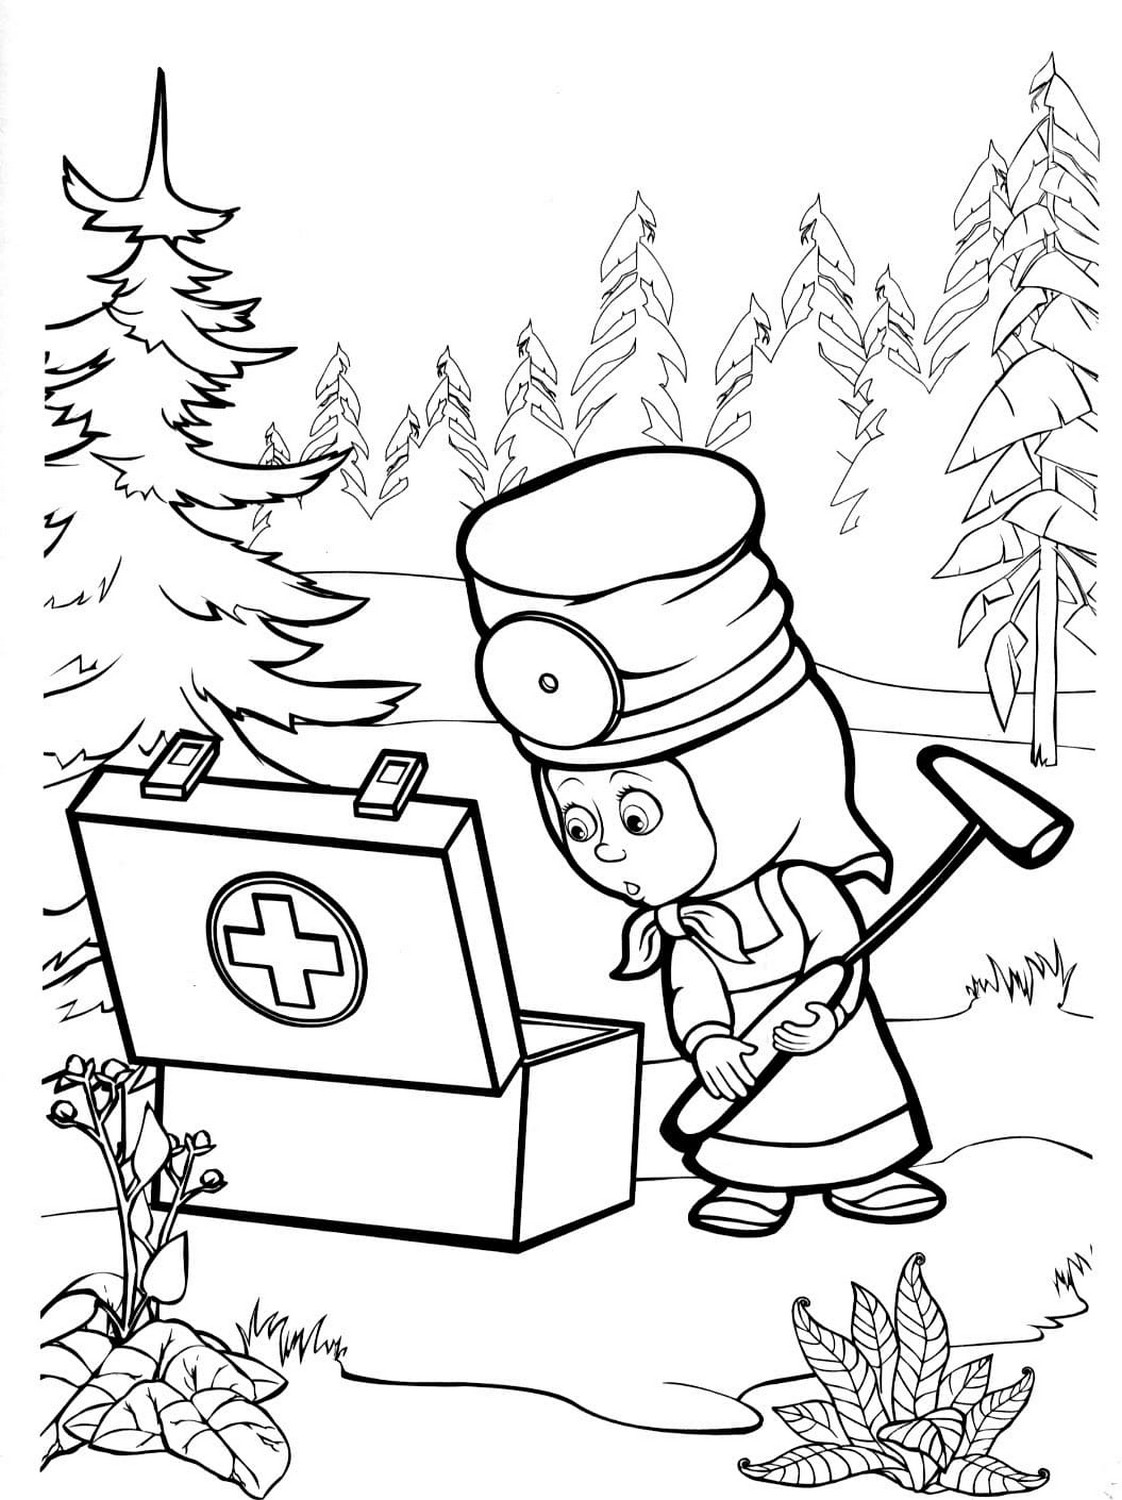 Masha and the Bear 61 drawing from Masha and the Bear to print and color